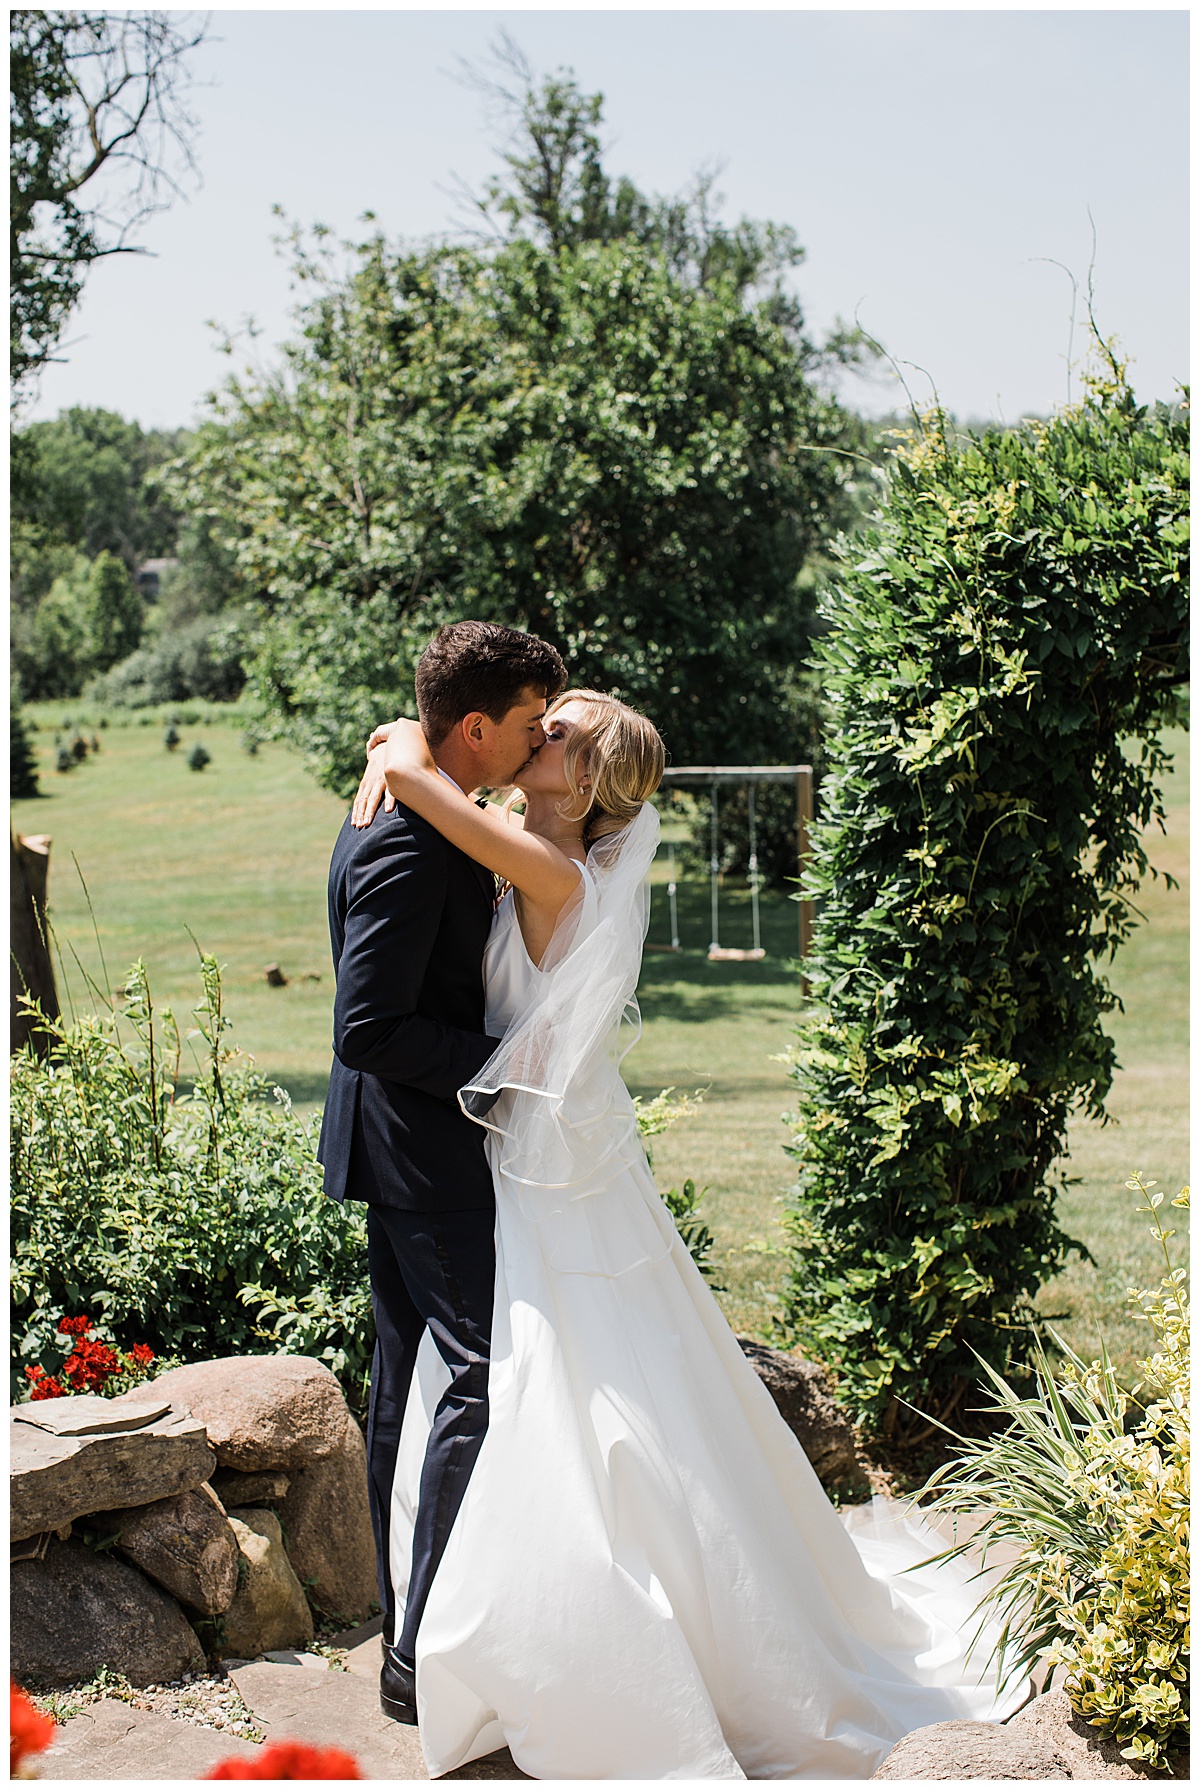 Kiss after first look| Ontario wedding| Ontario wedding photographer| Toronto wedding photographer| 3photography